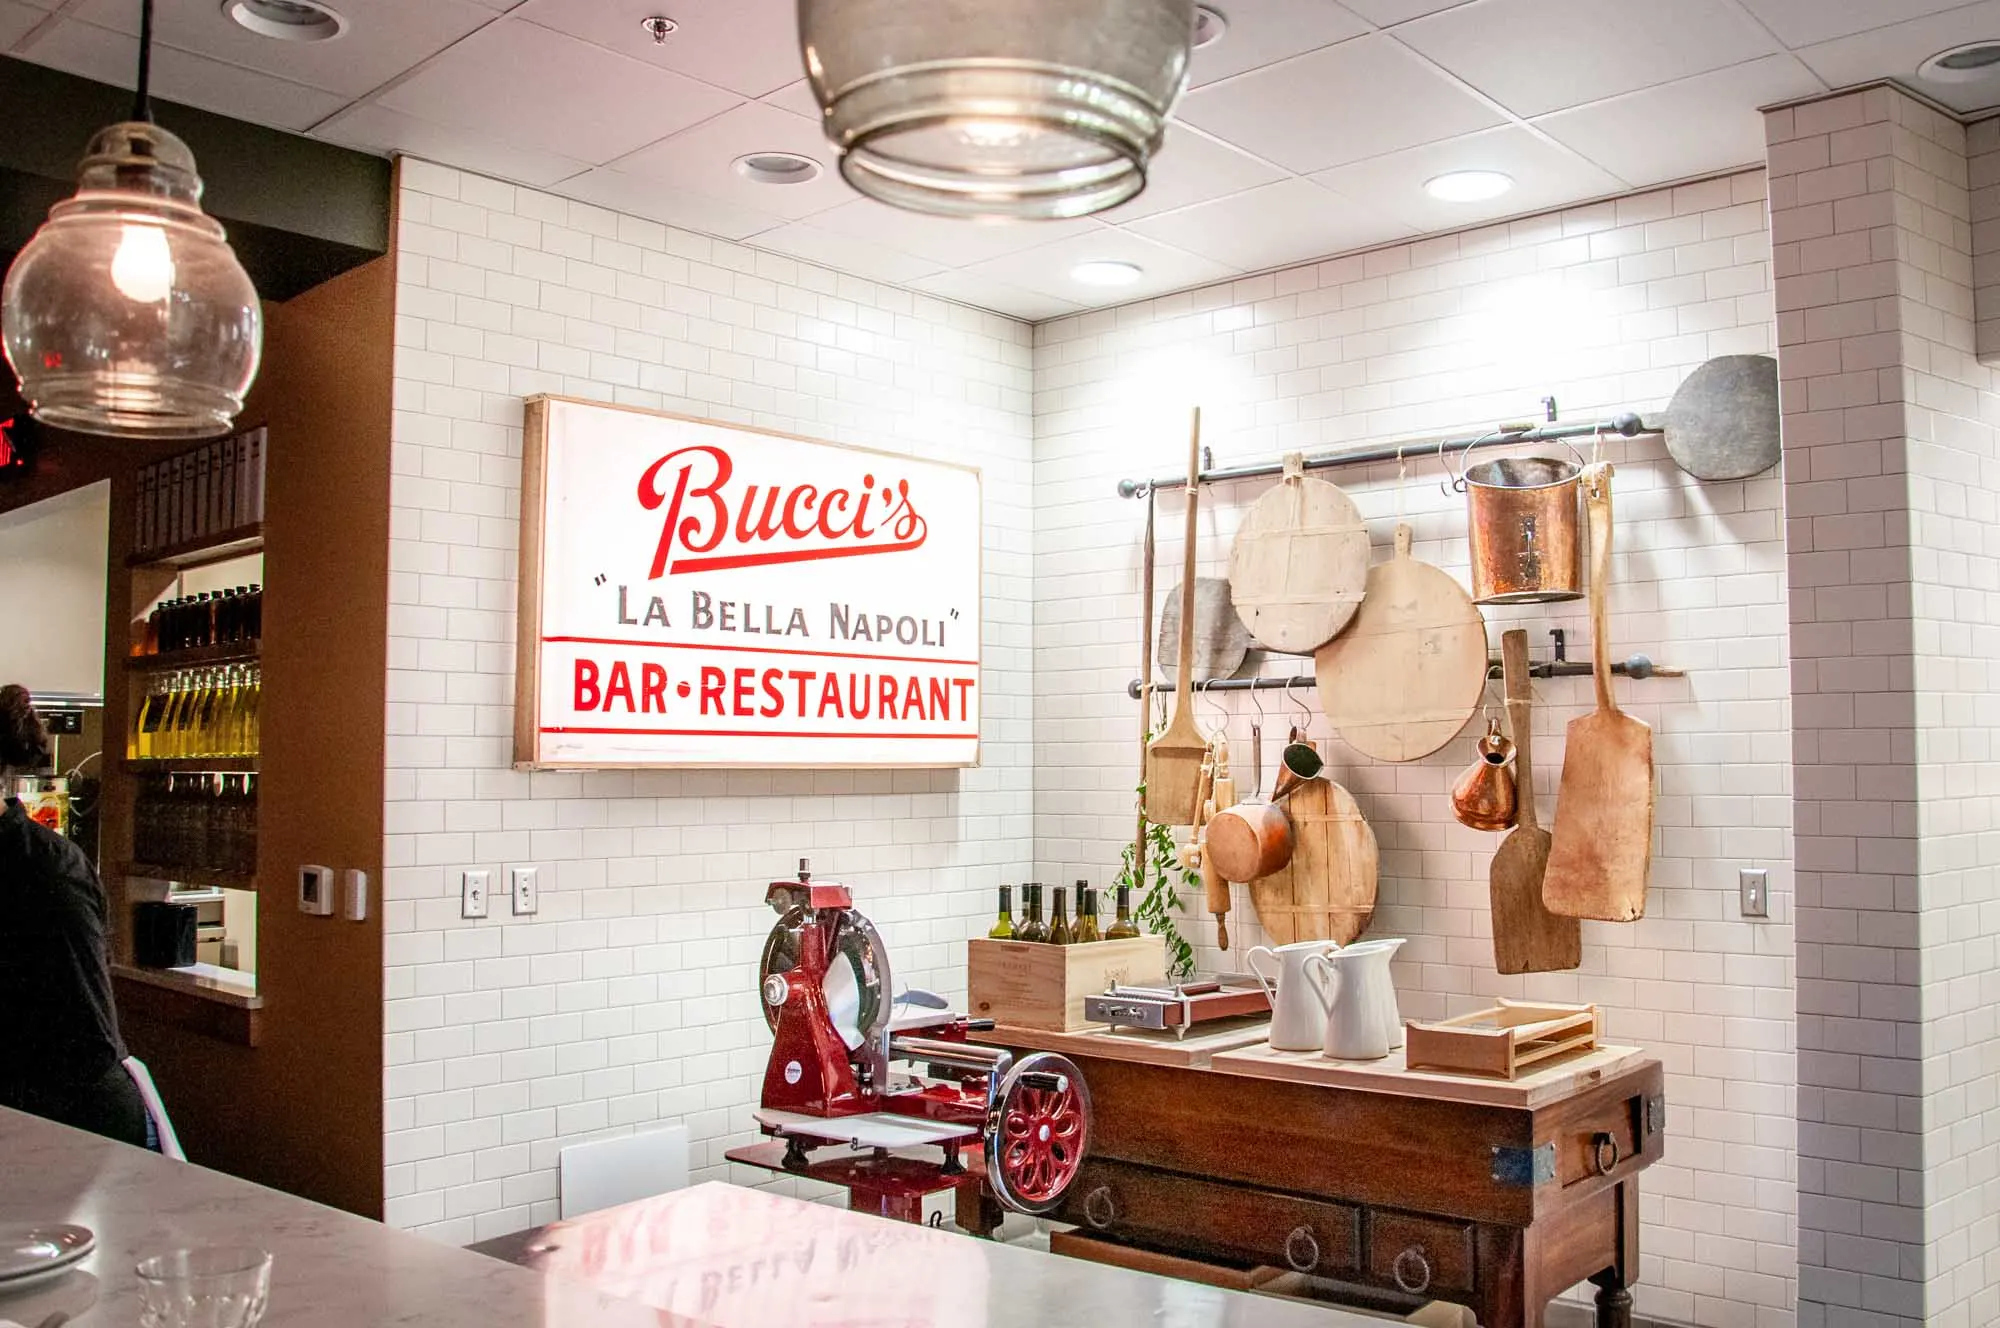 Cutting boards and other tools hanging on a restaurant wall beside a sign for Bucci's Bar & Restaurant